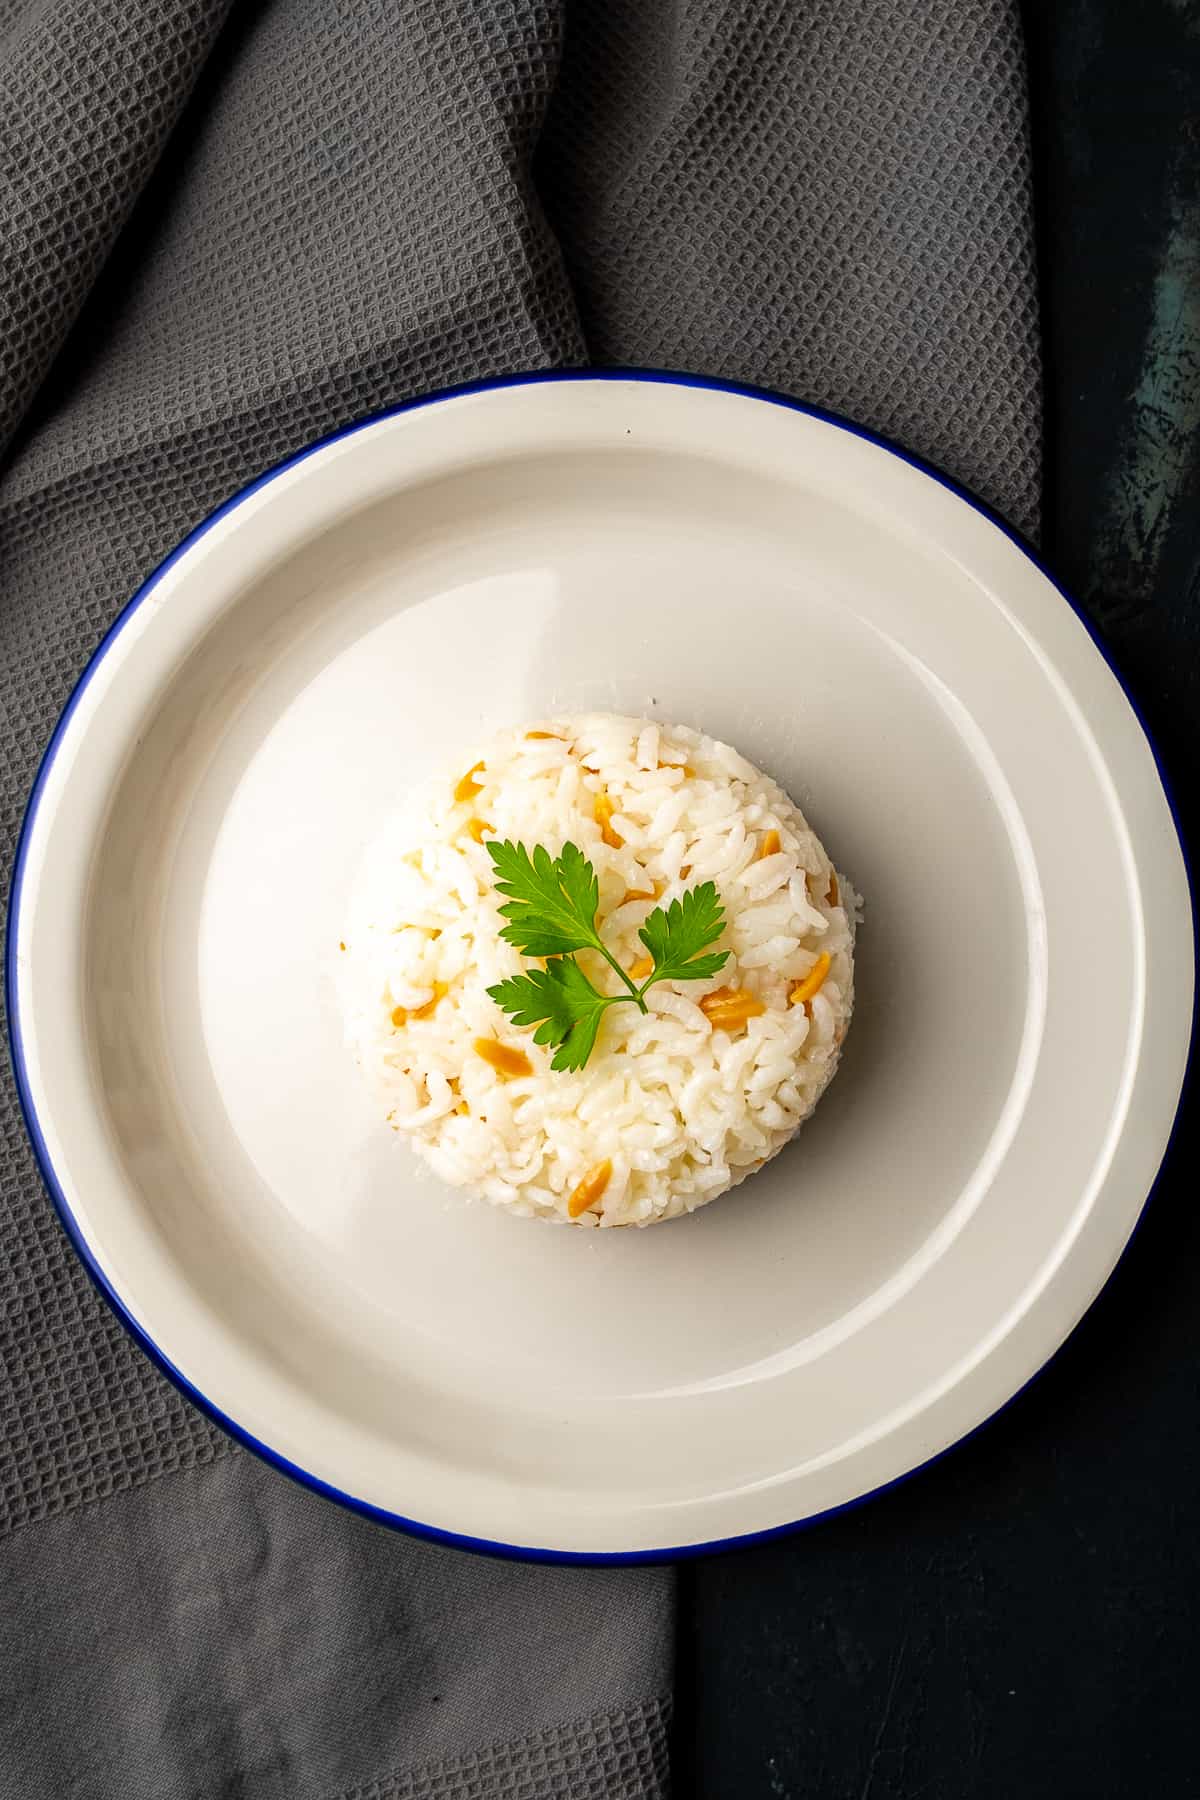 Turkish rice served on a white plate, garnished with parsley.